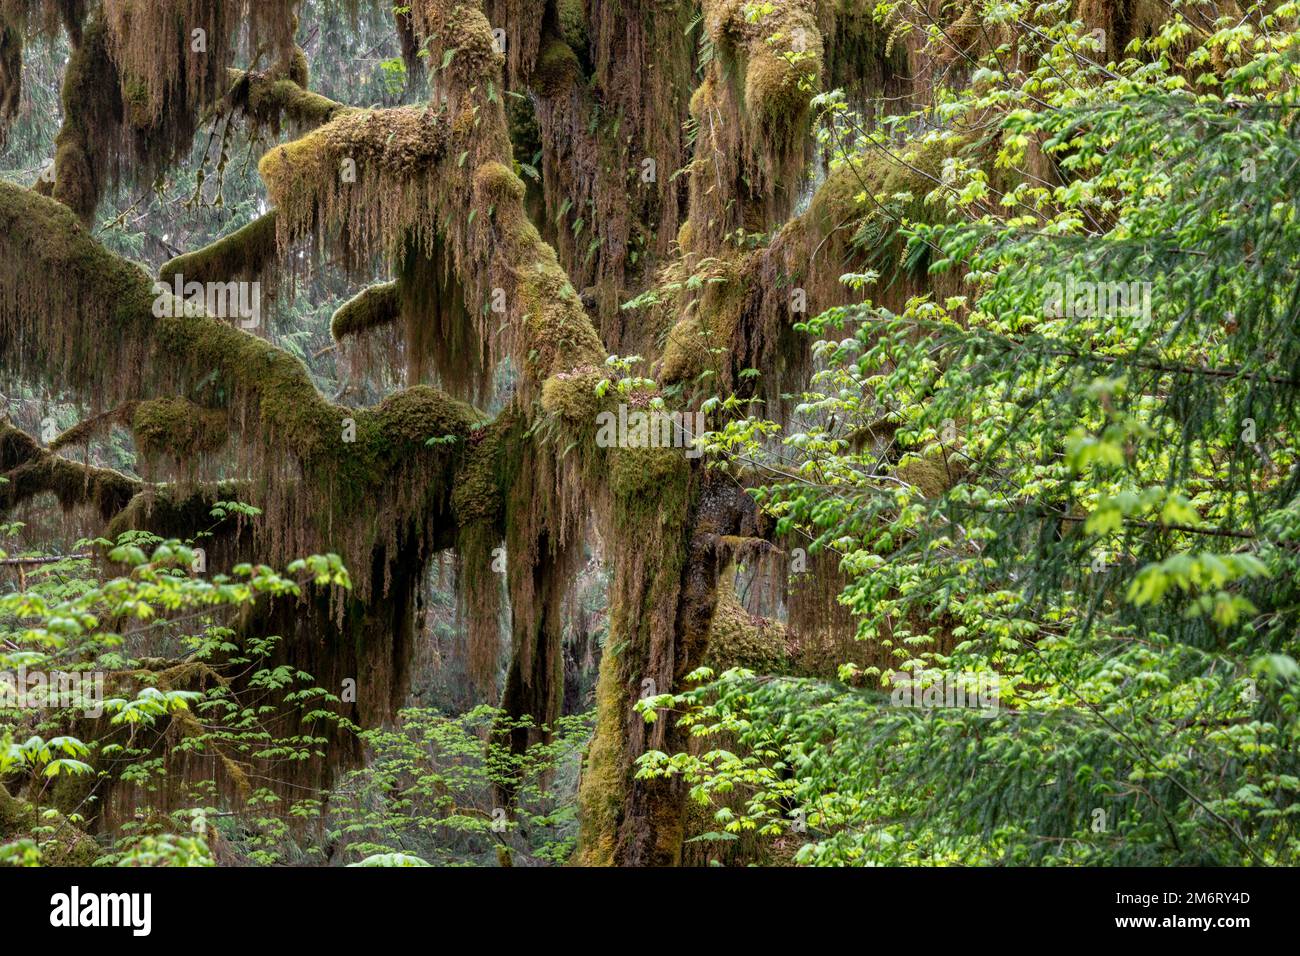 WA20873-00..... WASHINGTON - Moss covered trees in the Hoh Rainforest, Olympic National Park. Stock Photo